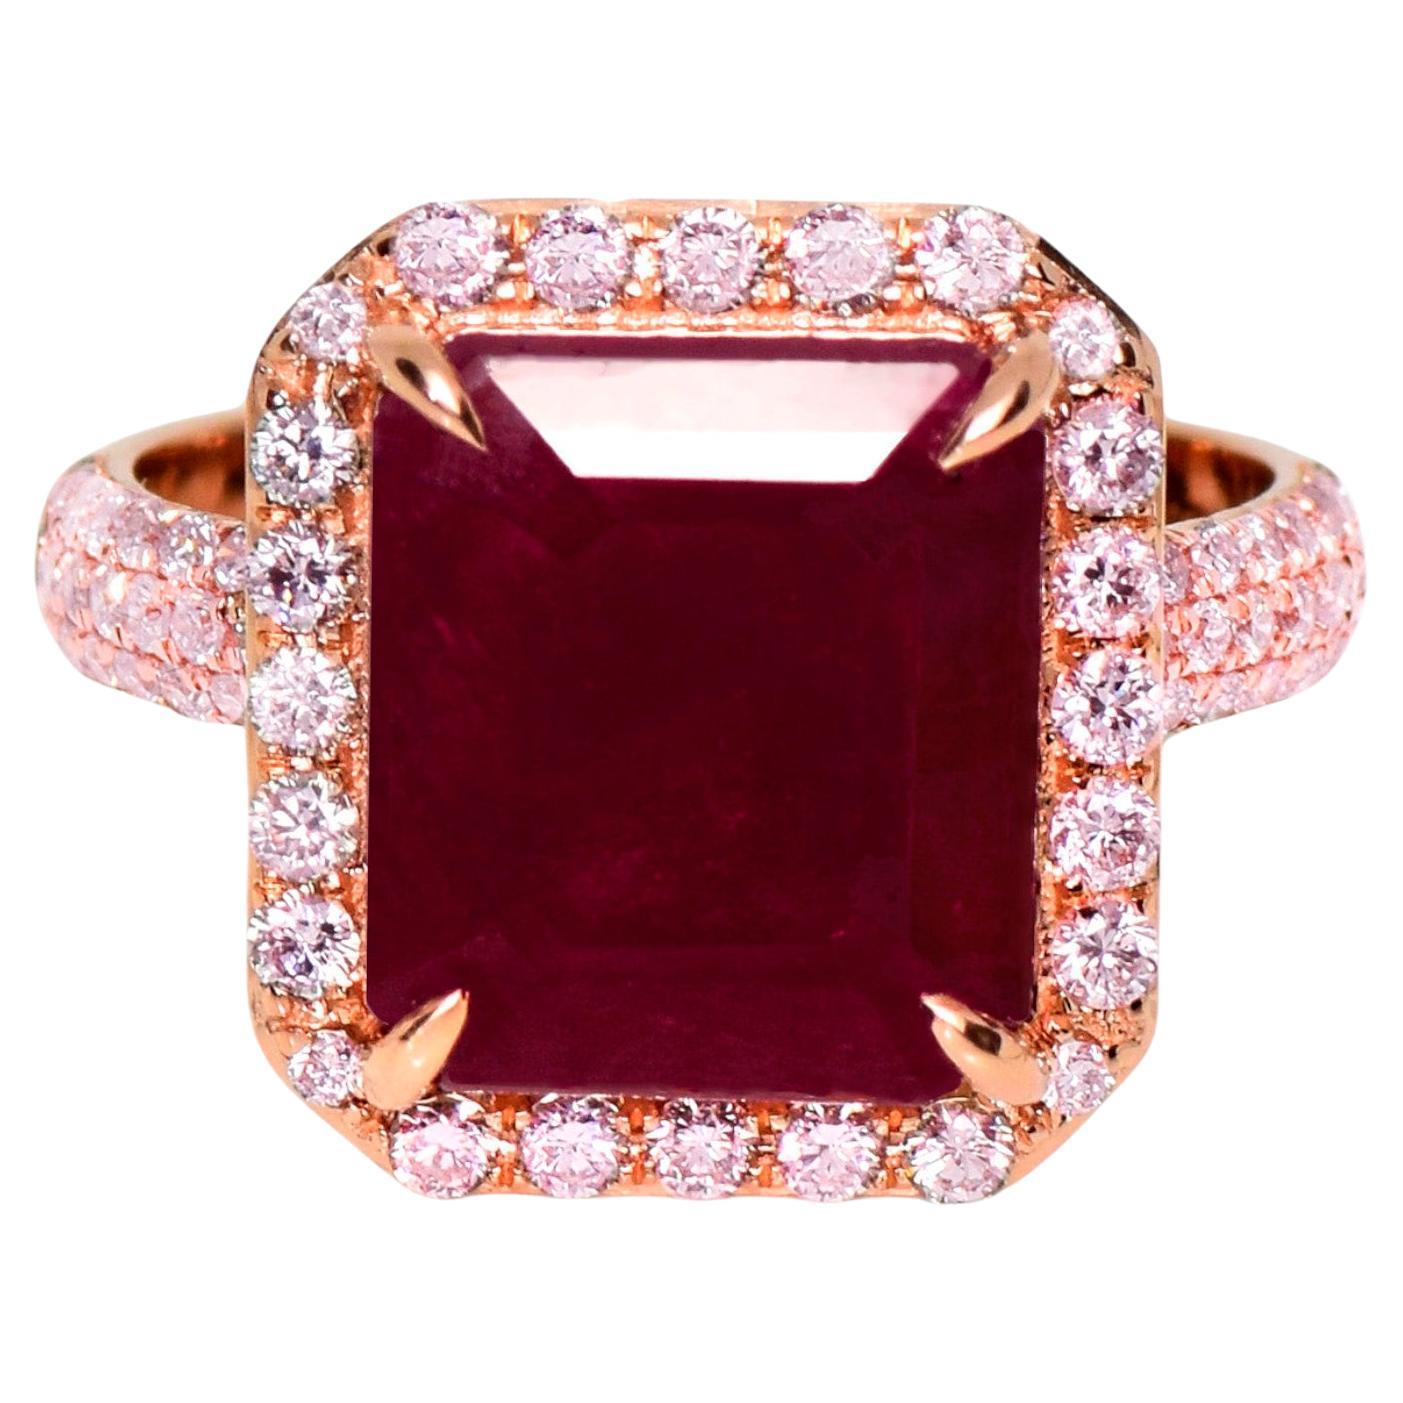 IGI 14K 6.70 ct Natural Unheated Red Ruby&Pink Diamonds Engagement Ring For Sale